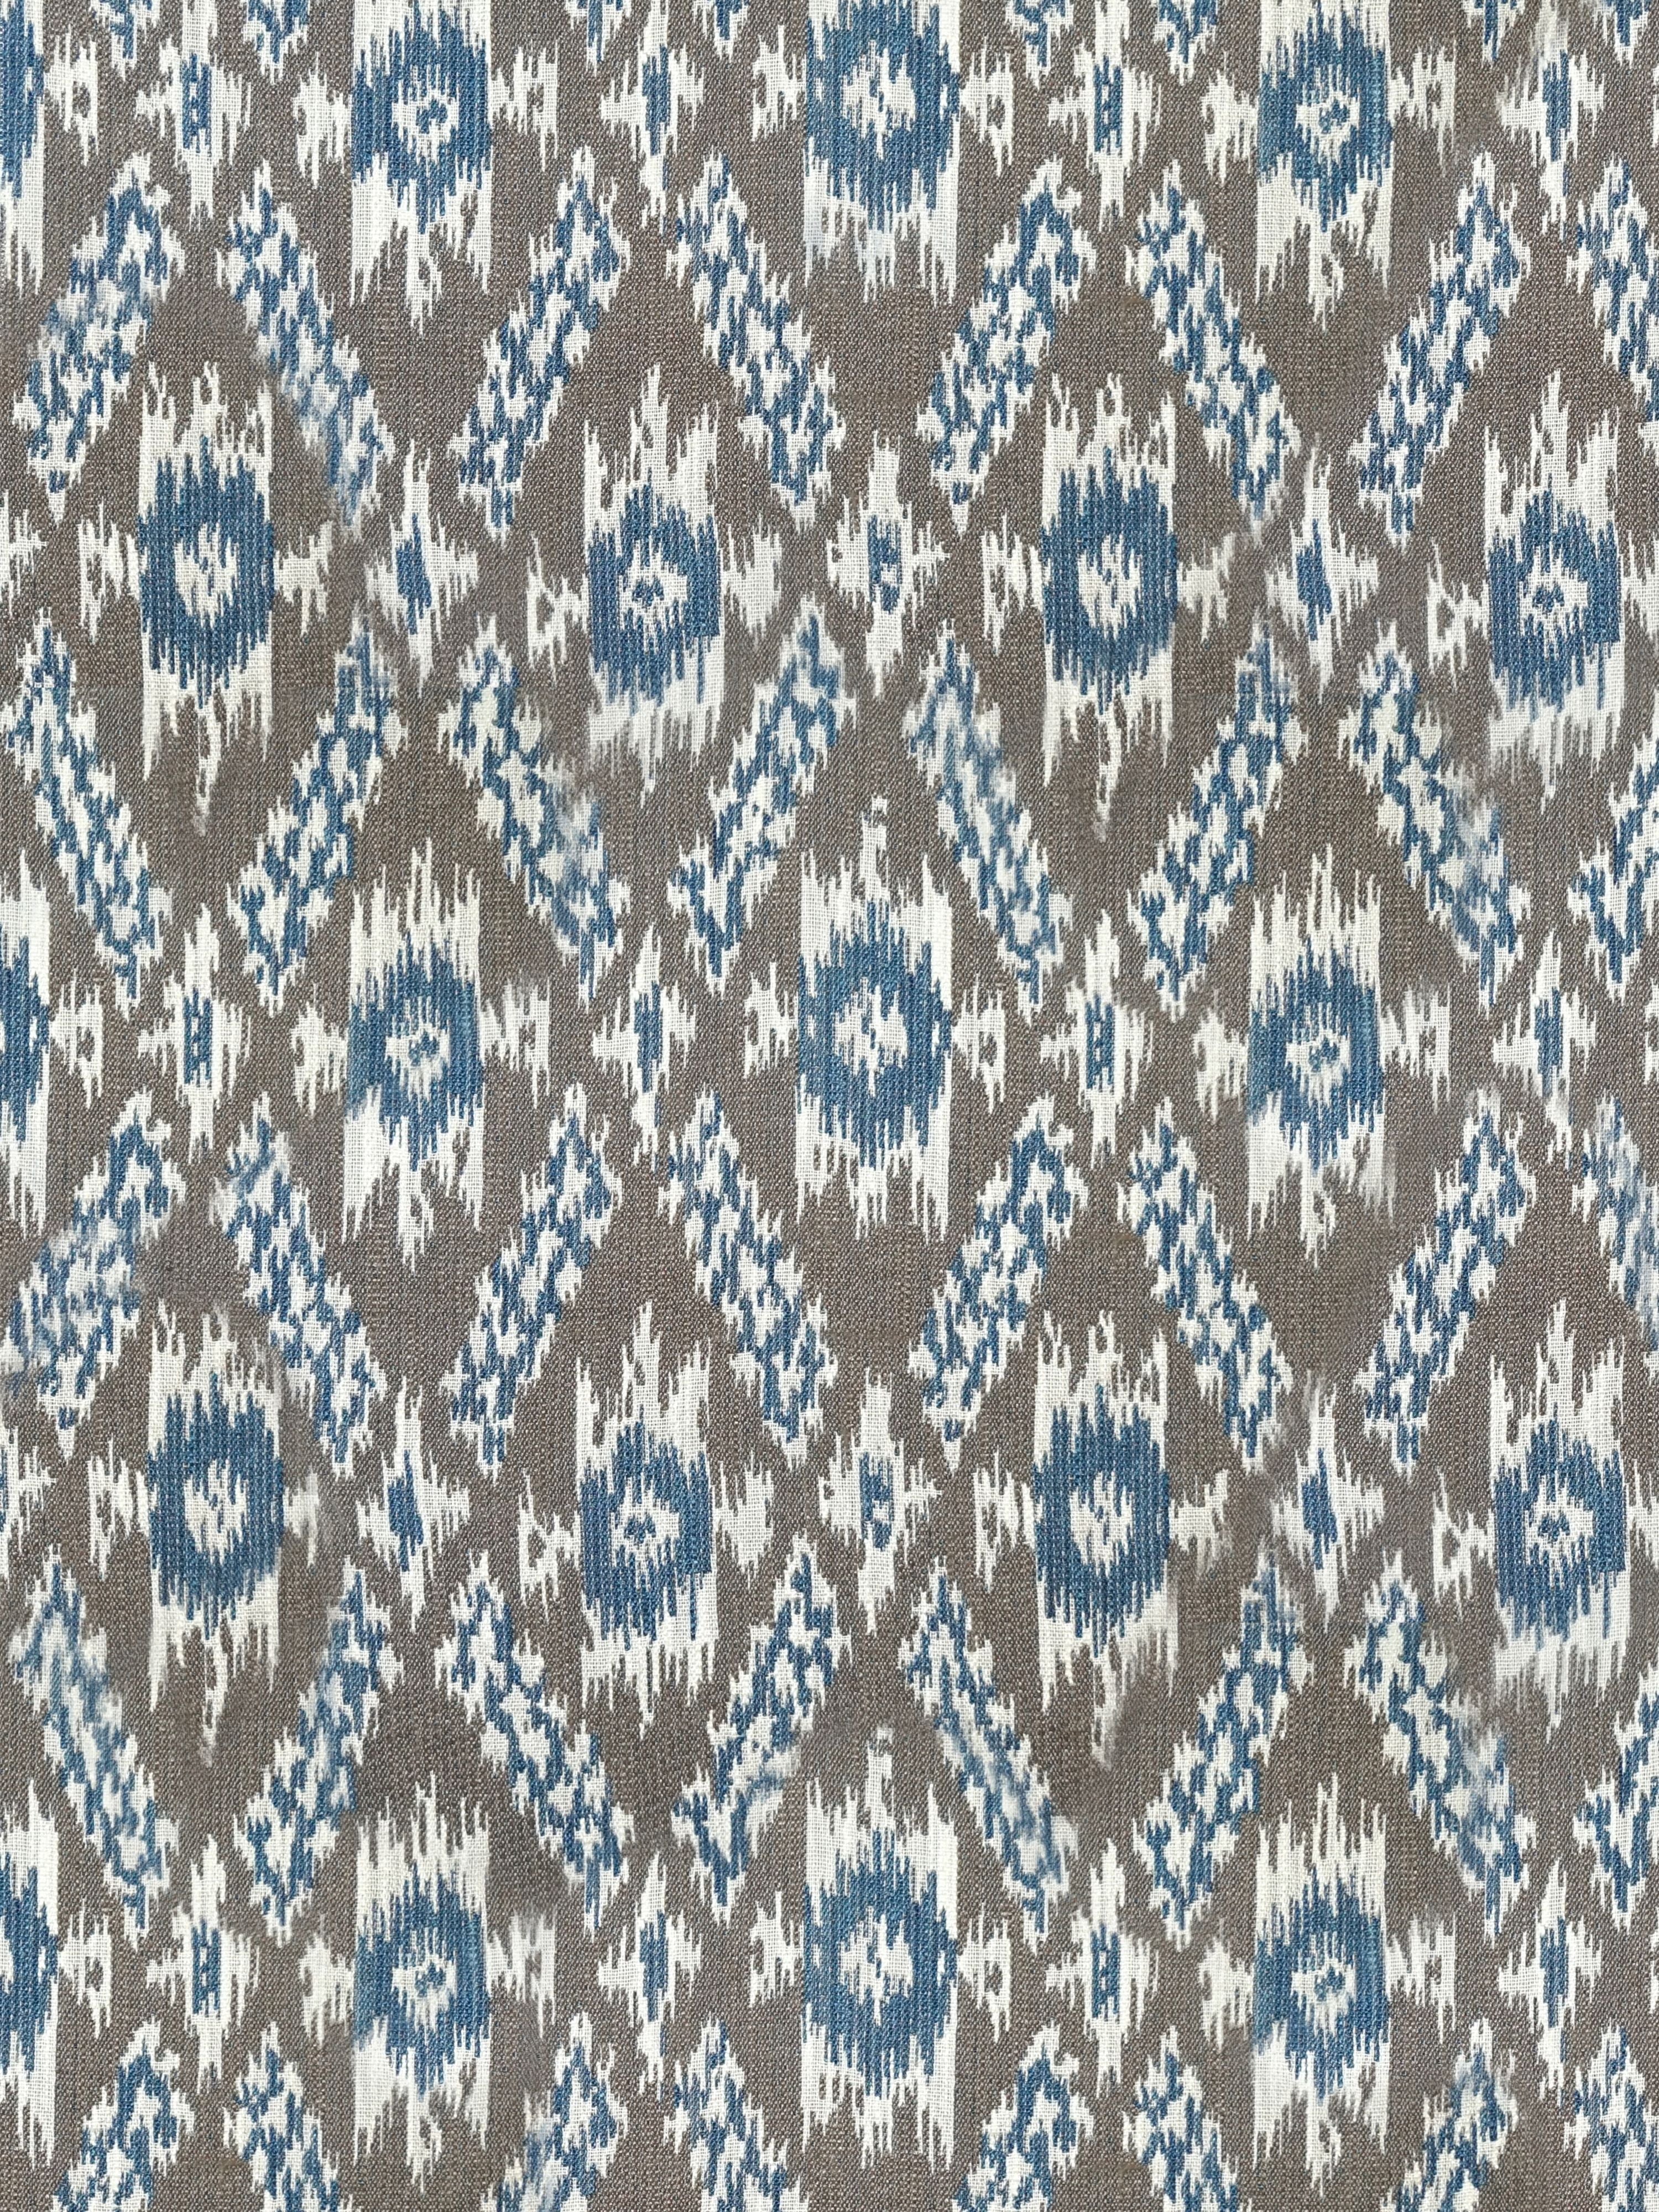 Atlas fabric in blue and taupe color - pattern number SC 000326980 - by Scalamandre in the Scalamandre Fabrics Book 1 collection